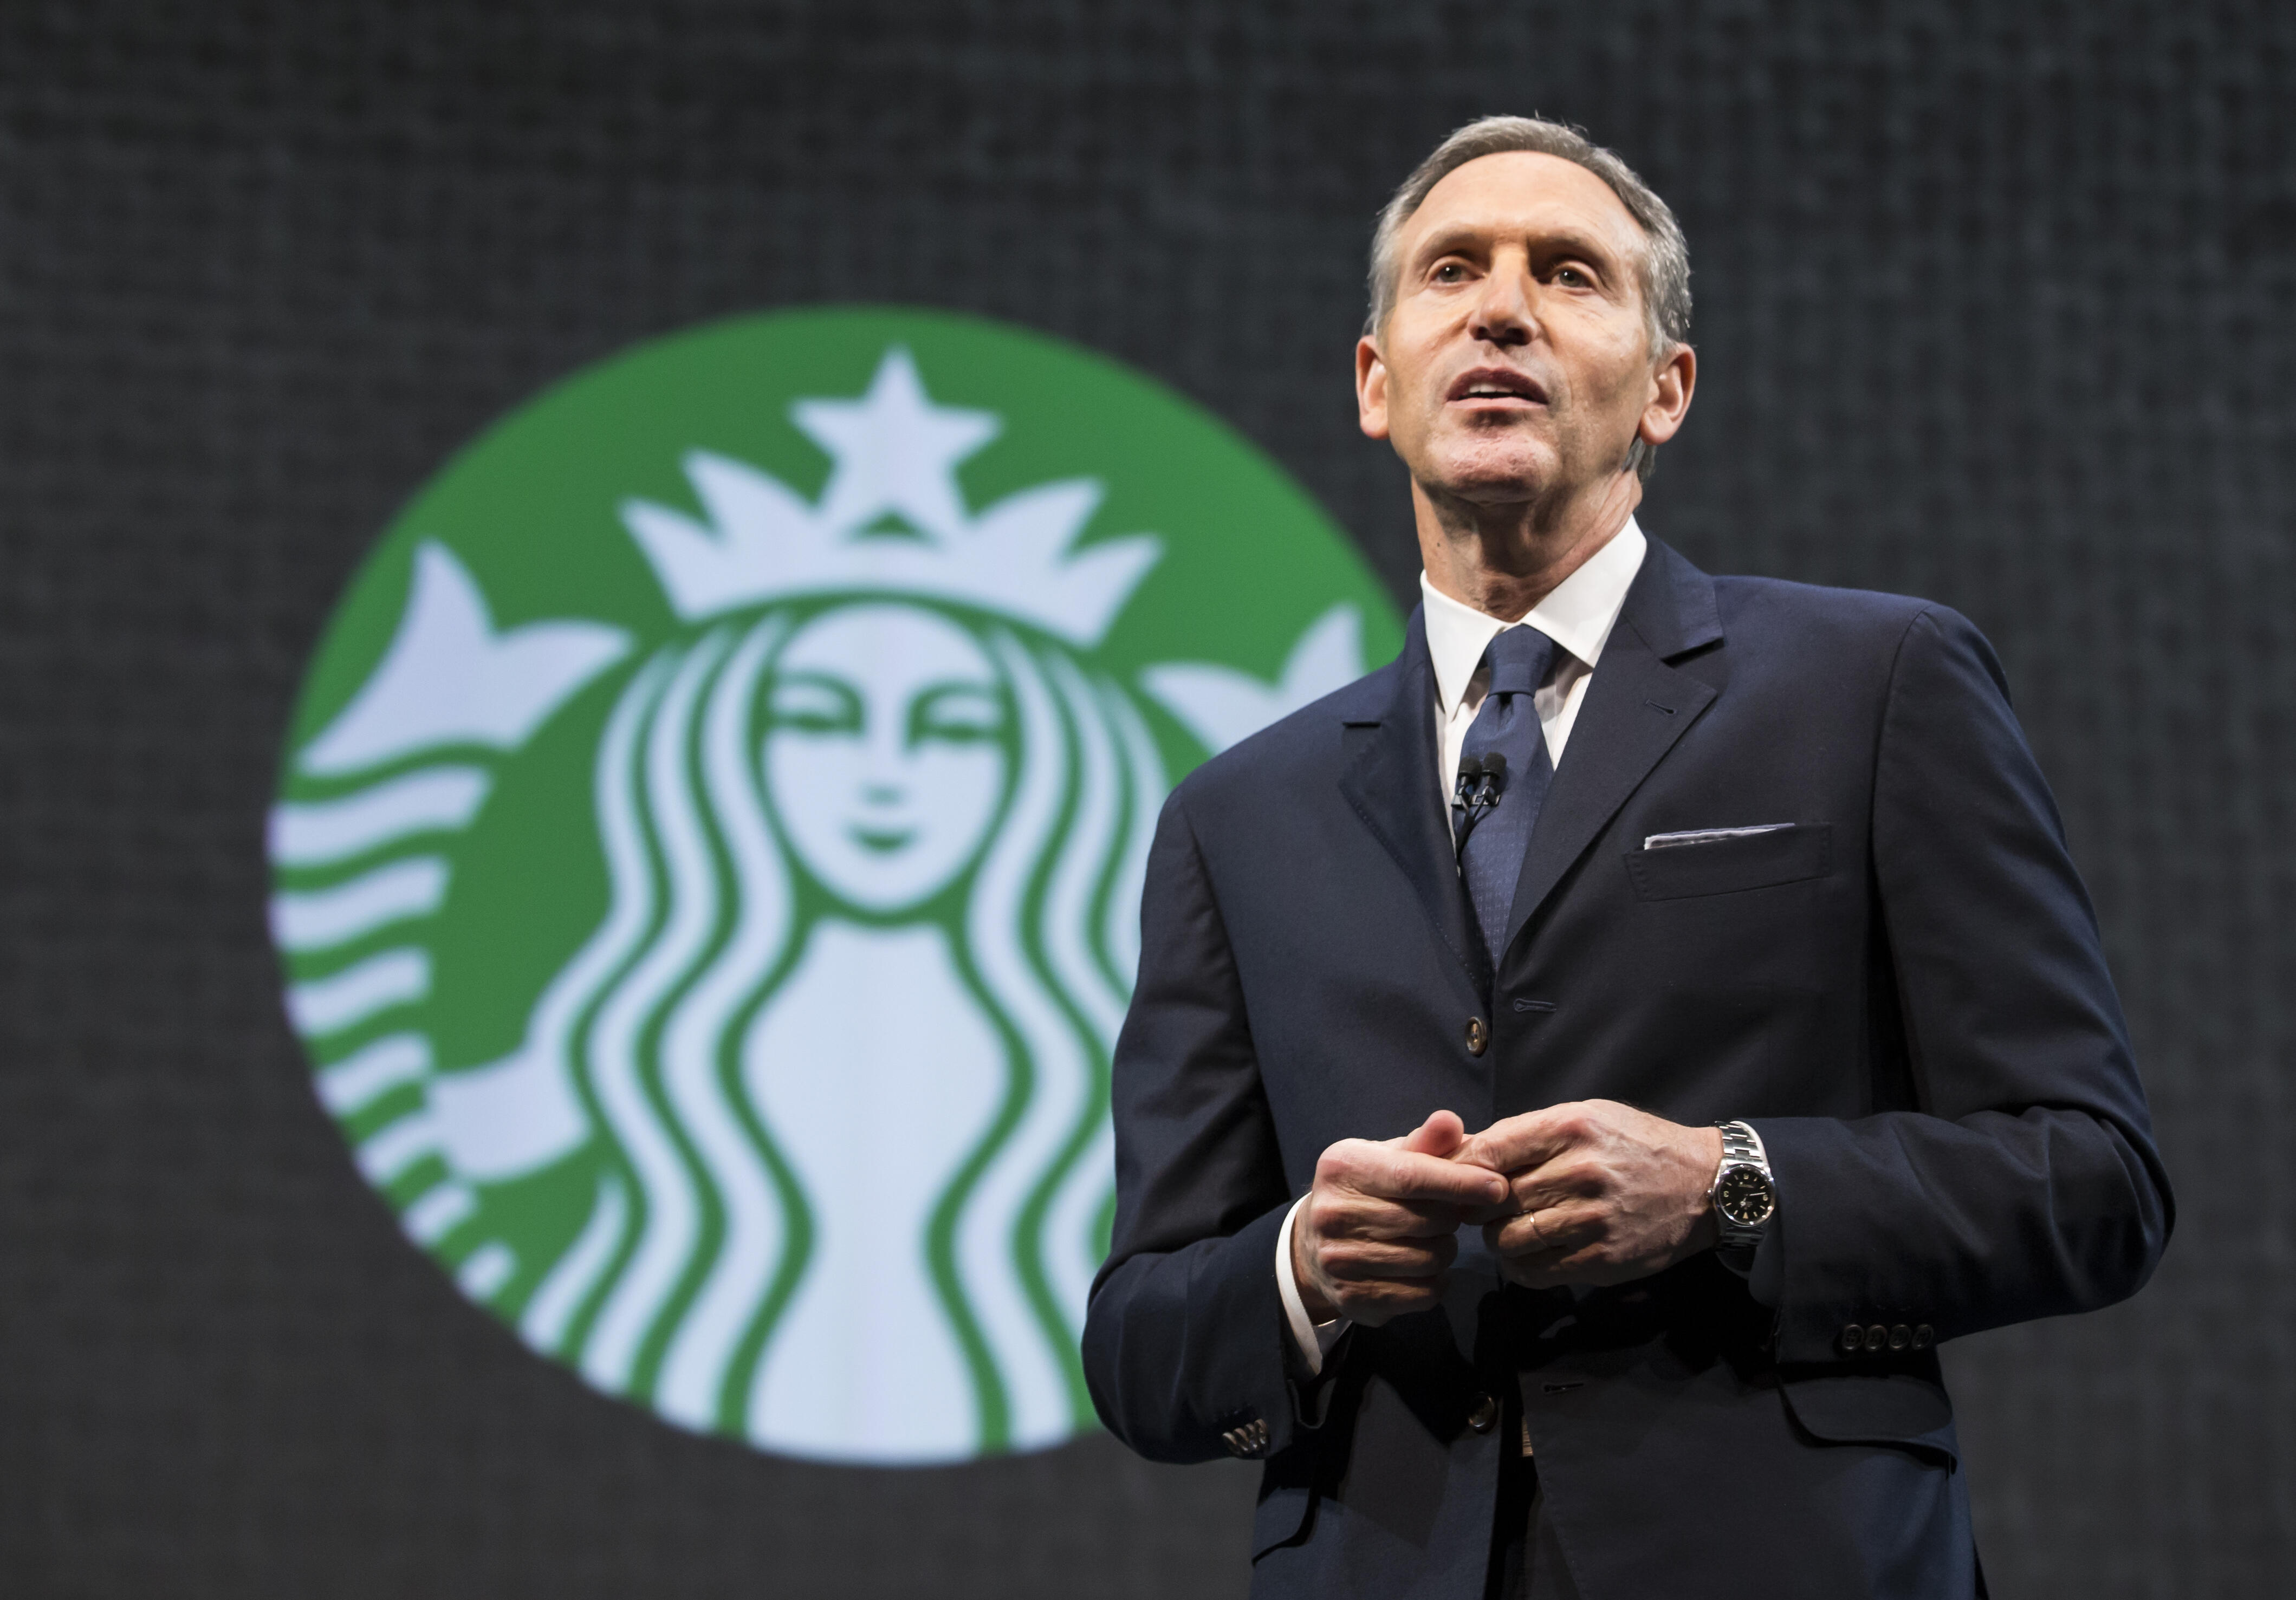 SEATTLE, WA - MARCH 18:  Starbucks Chairman and CEO Howard Schultz speaks during Starbucks annual shareholders meeting March 18, 2015 in Seattle, Washington. Schultz announced a 2-for-1 stock split, the sixth in the company's history, during the meeting. 